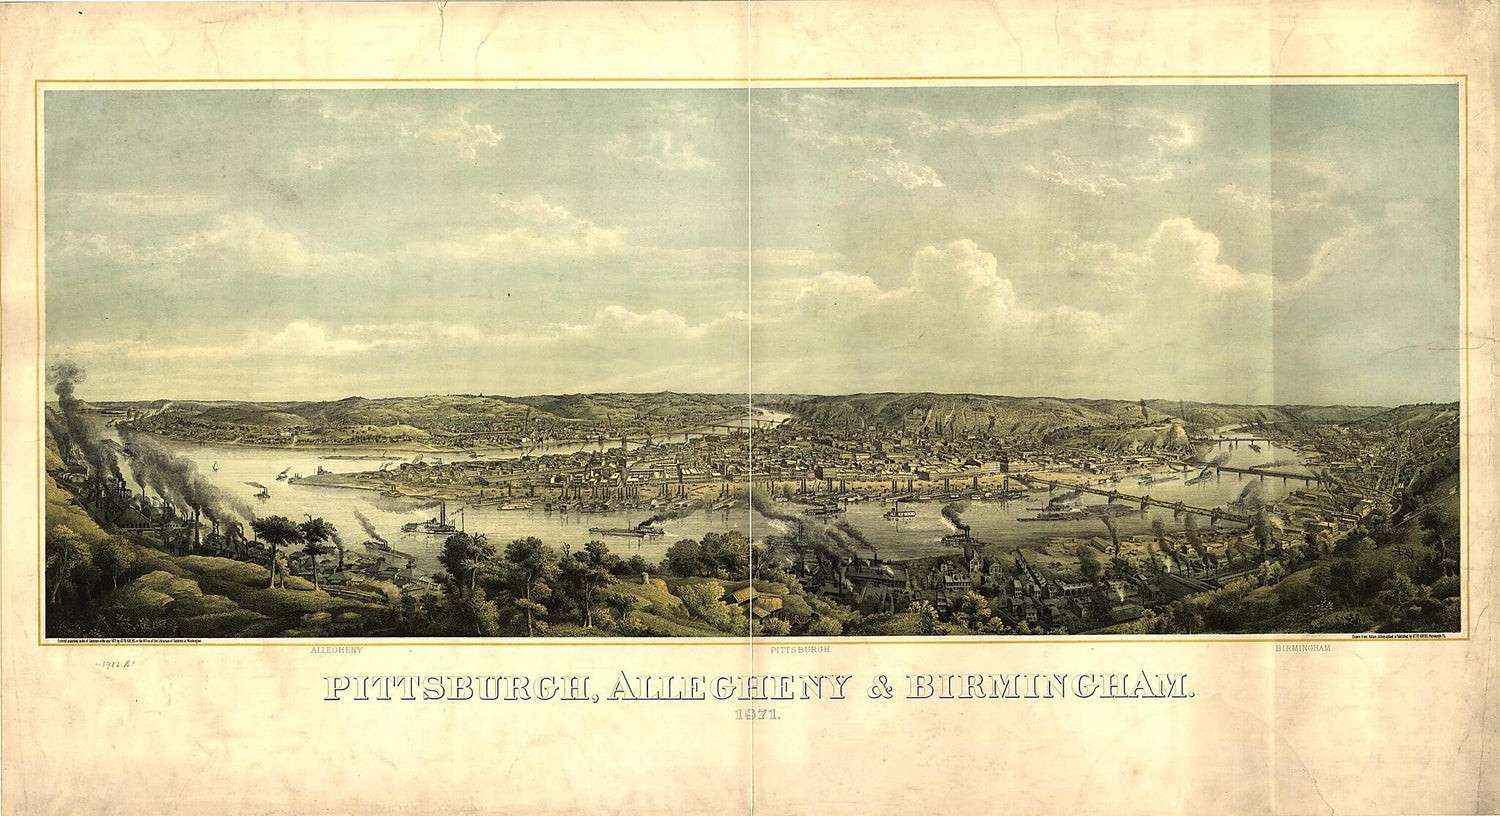 This old map of Pittsburgh, Allegheny &amp; Birmingham / Drawn from Nature, Lithographed &amp; Published by Otto Krebs, Pittsburgh, Pennsylvania from 1871 was created by Otto Krebs in 1871